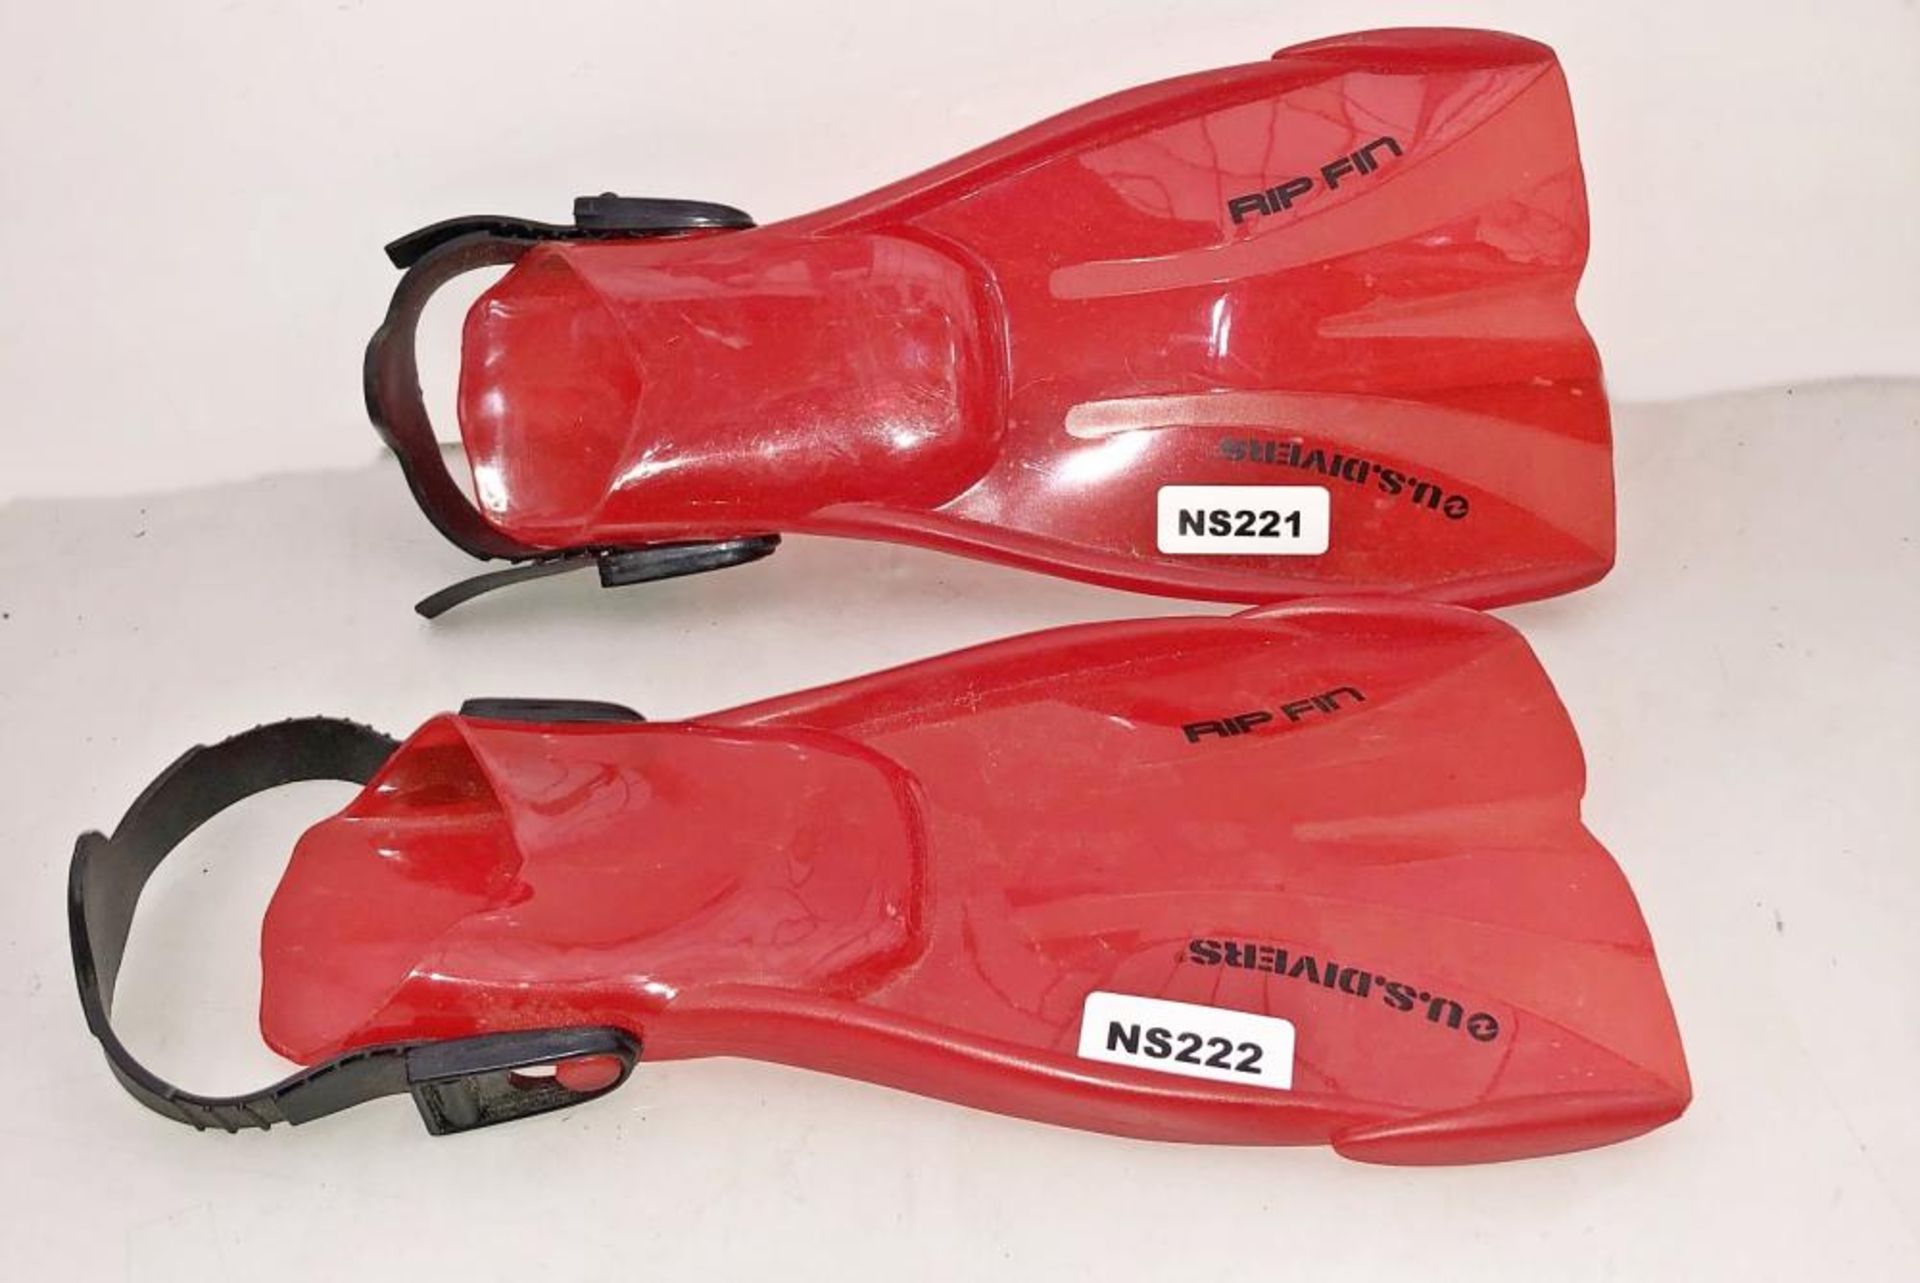 3 x Pairs Of Children's Diving Fins - CL349 - Location: Altrincham WA14 - Image 4 of 9